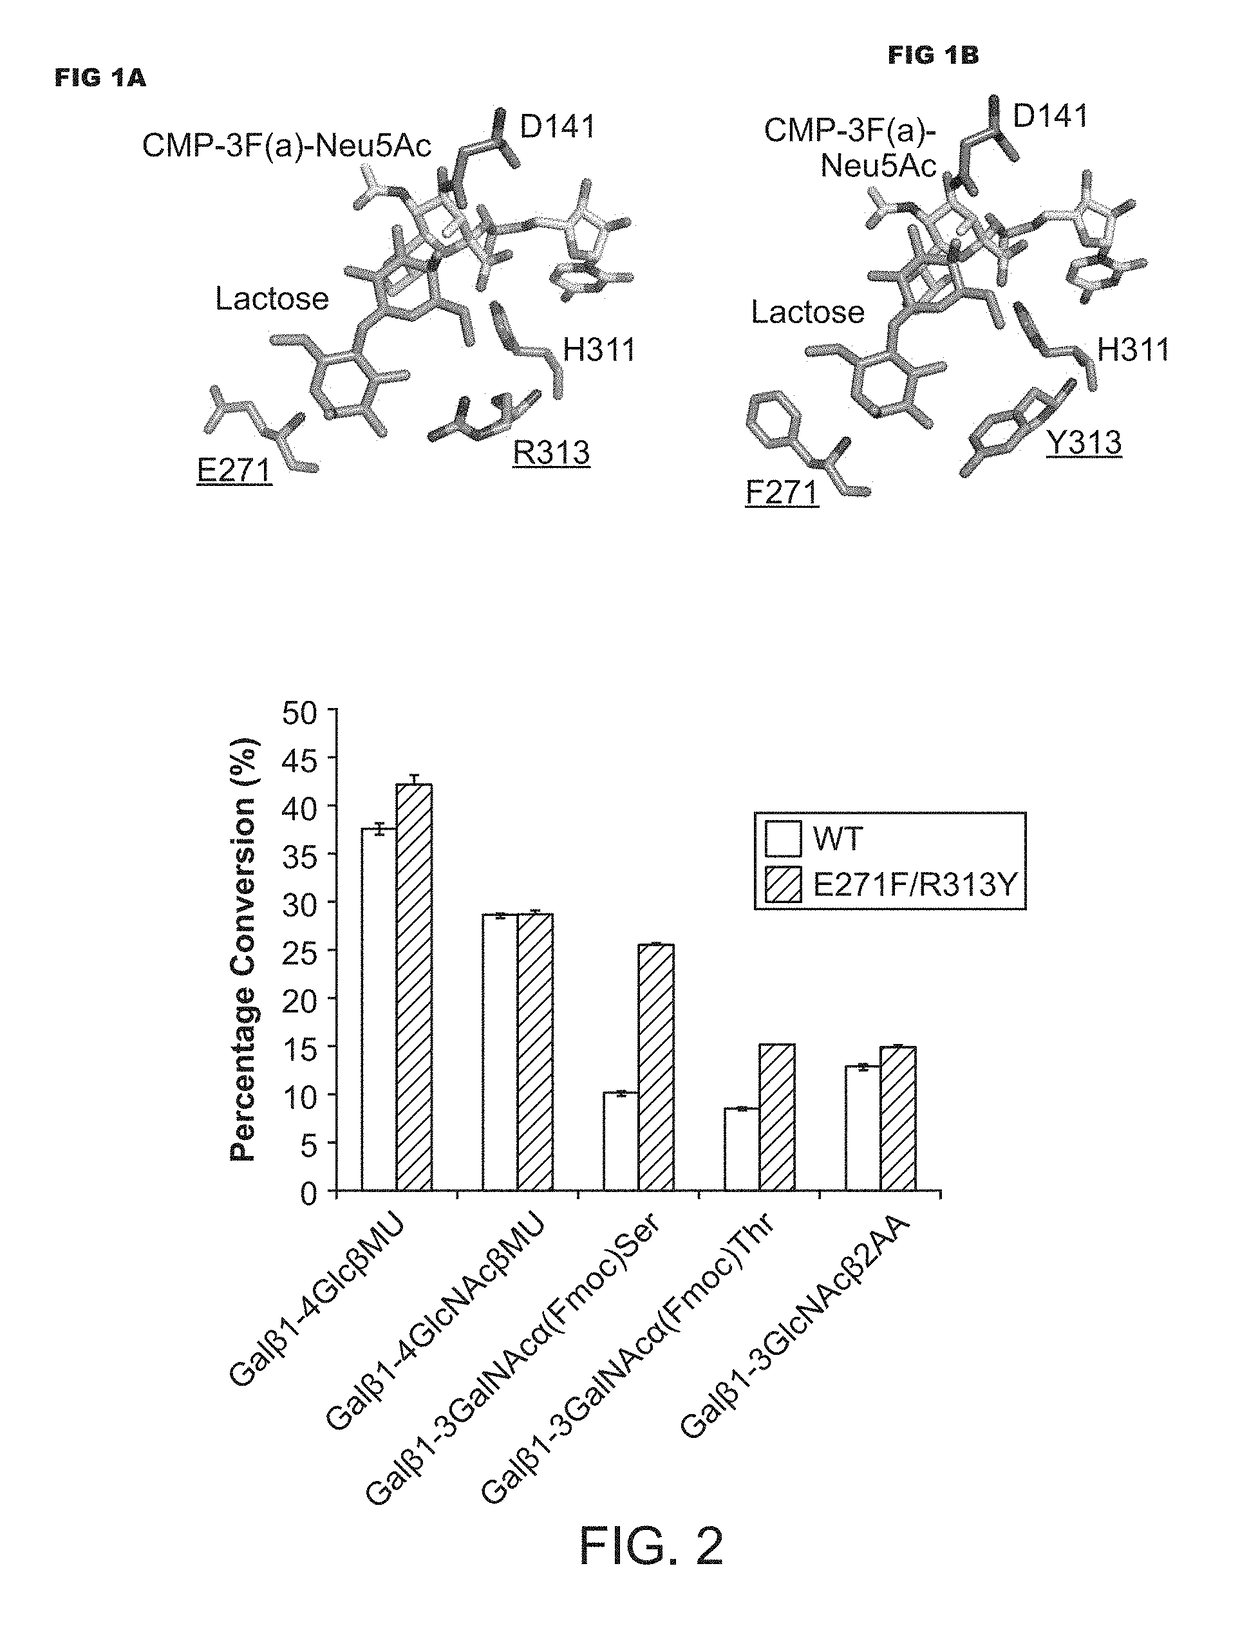 Pmst1 mutants for chemoenzymatic synthesis of sialyl lewis x compounds